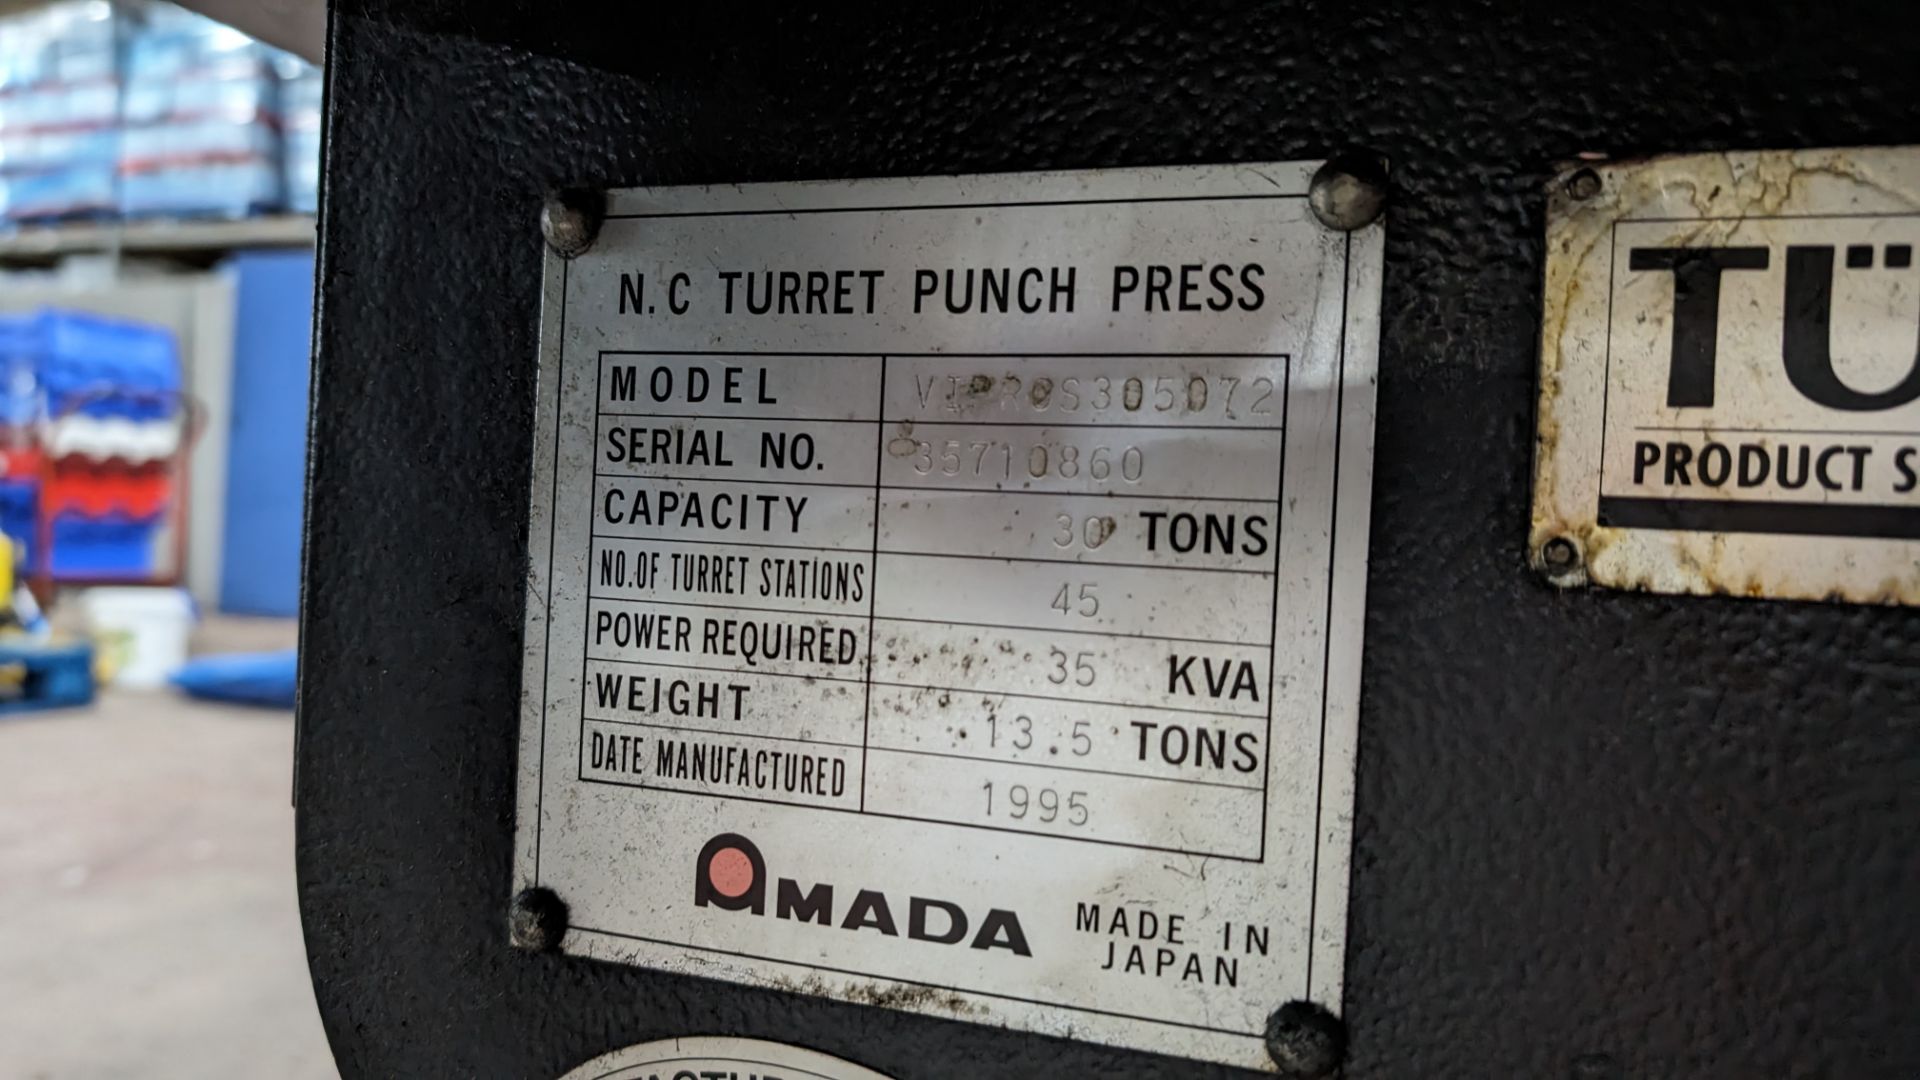 1995 Amada Vipros 357 NC turret punch press, 45 turret stations, 30 ton capacity, serial number 3571 - Image 27 of 51